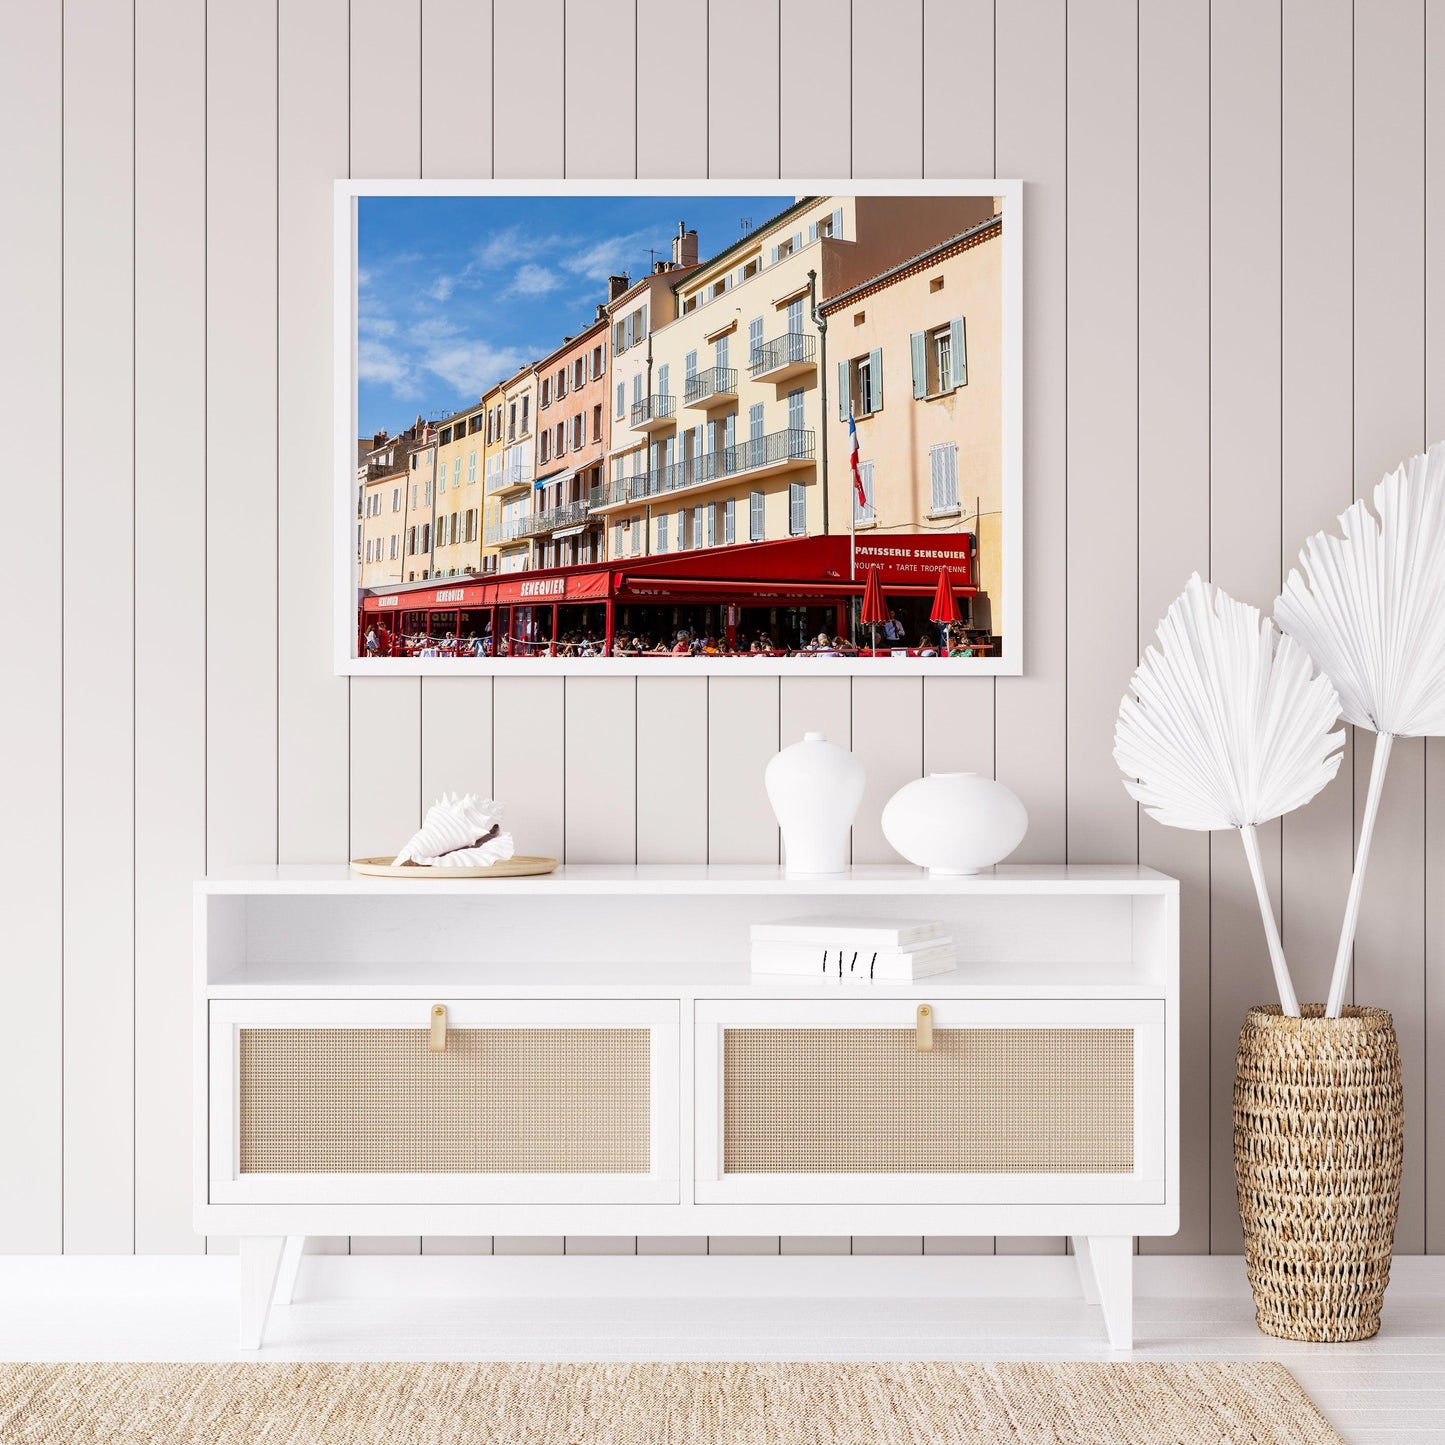 St. Tropez Architecture III | South of France Photography Print - Departures Print Shop